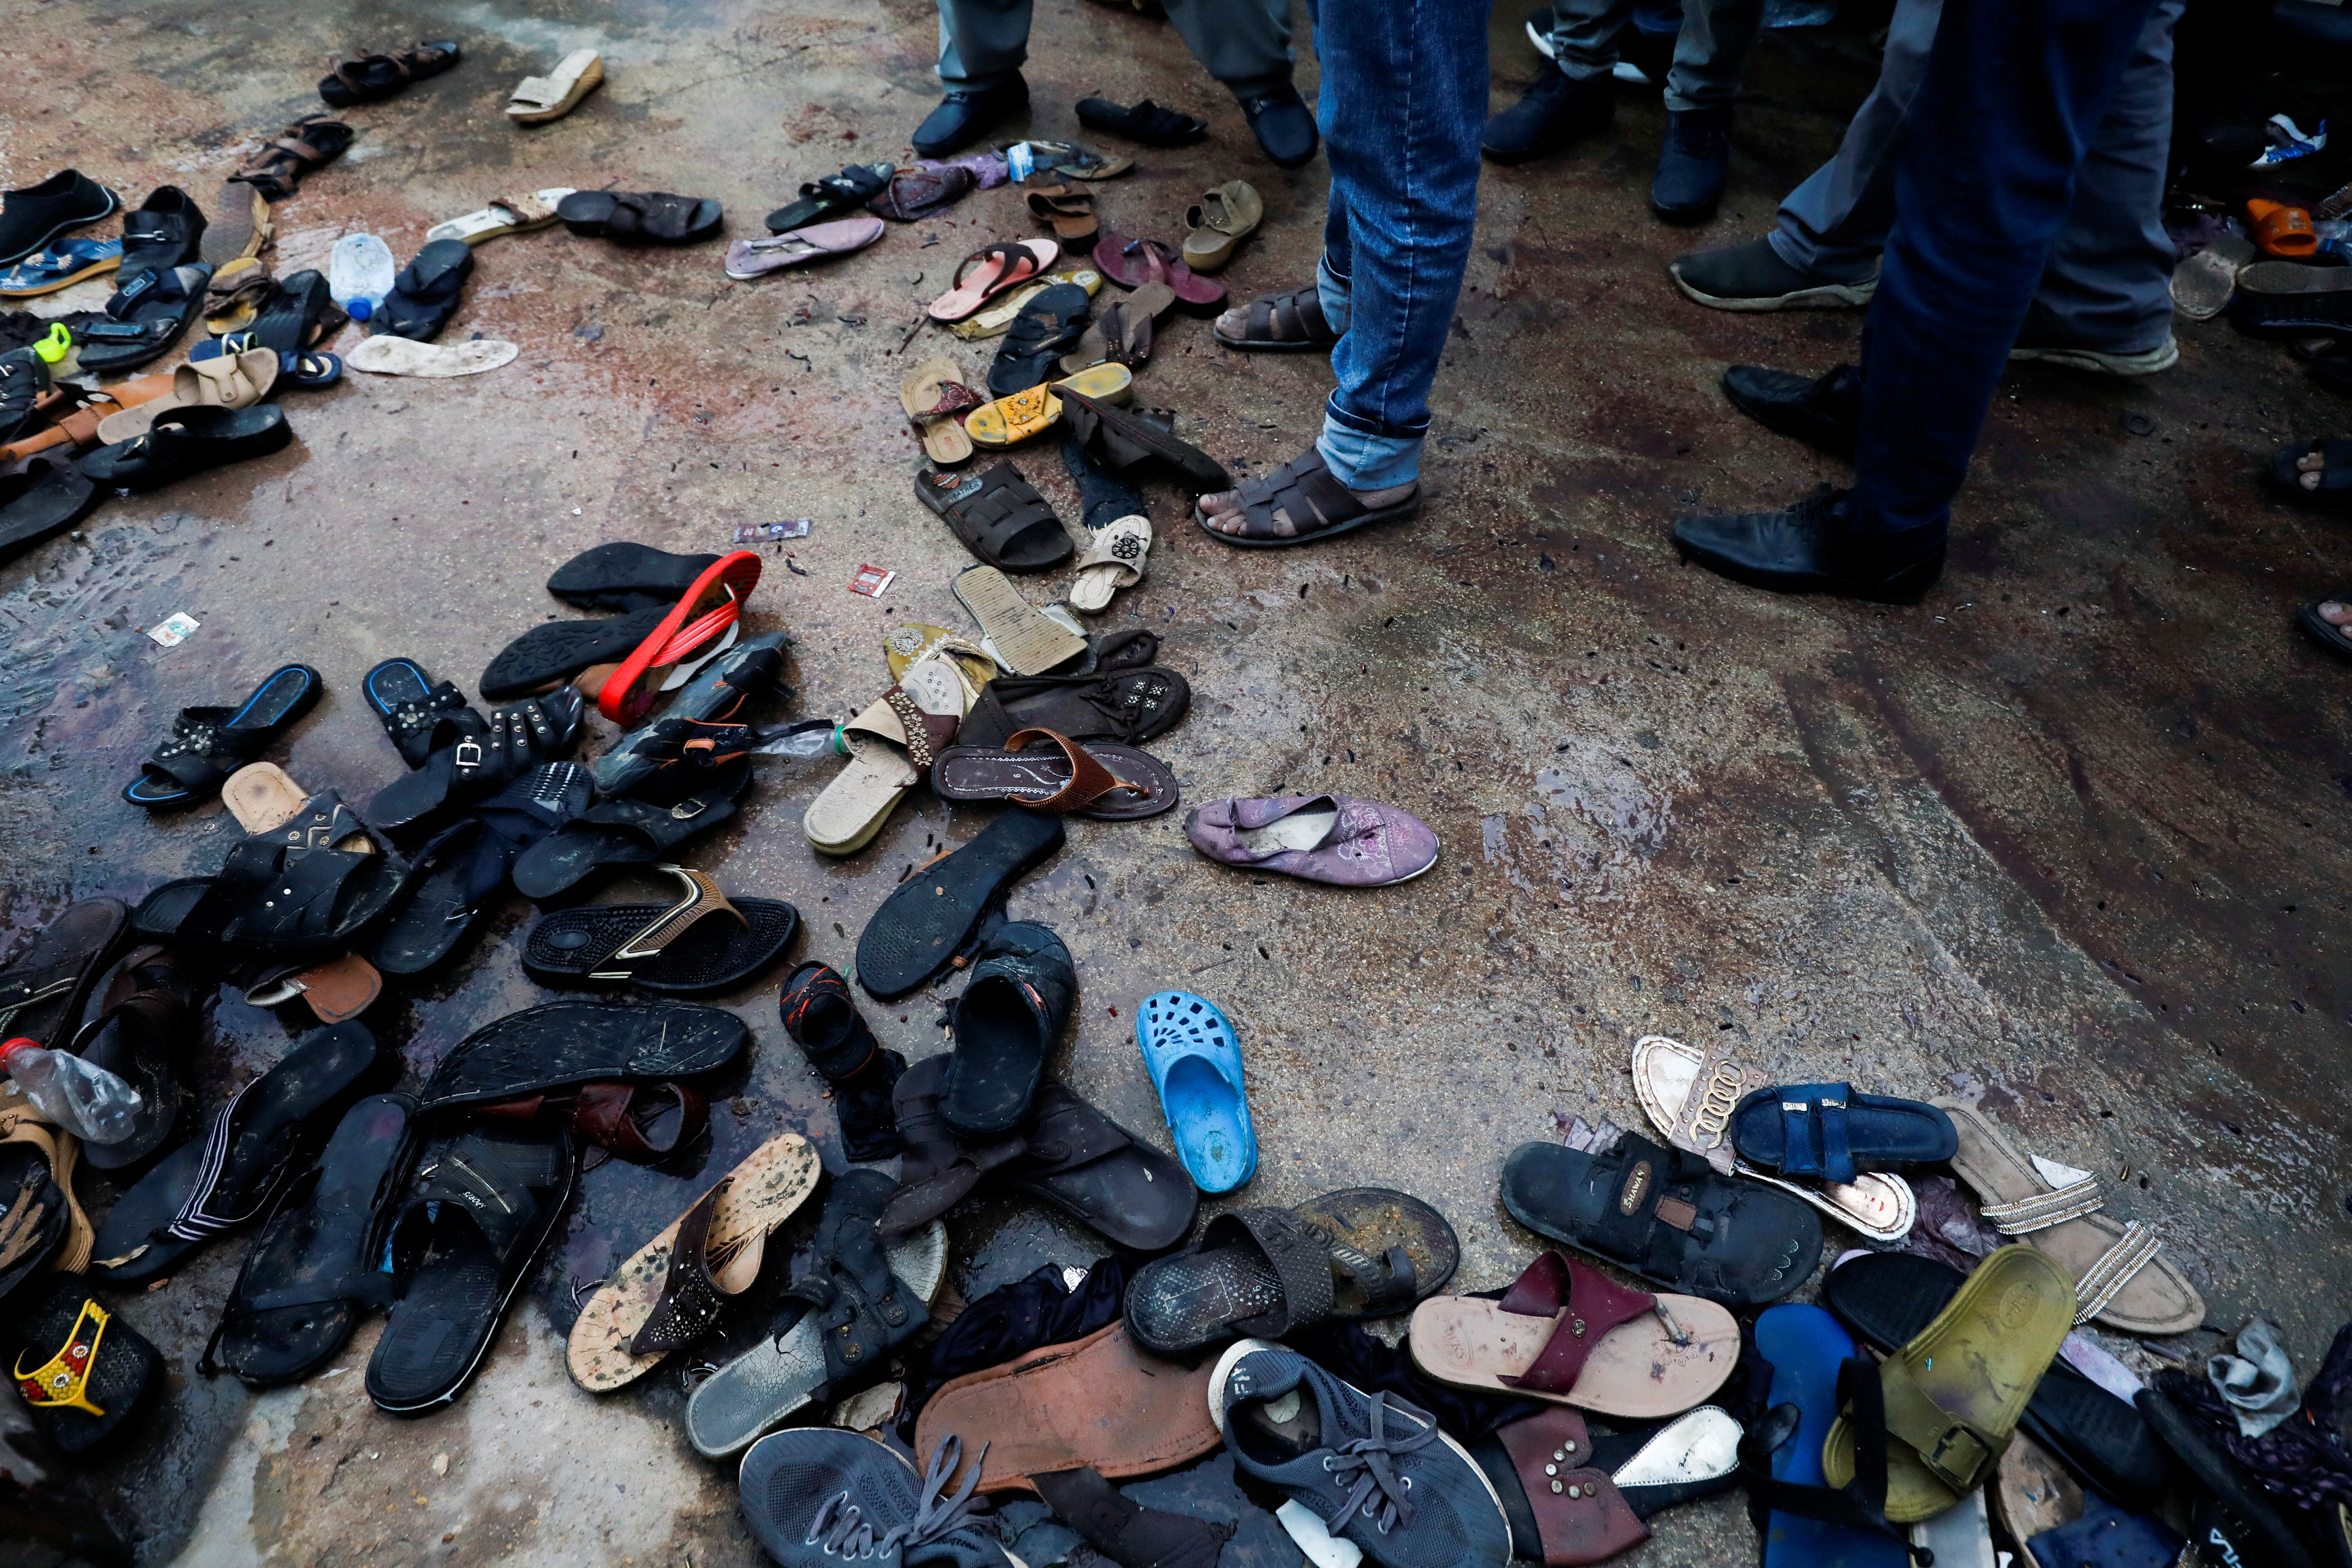 A view of a site with a pile of footwear after a stampede occurred during handout distribution, in Karachi